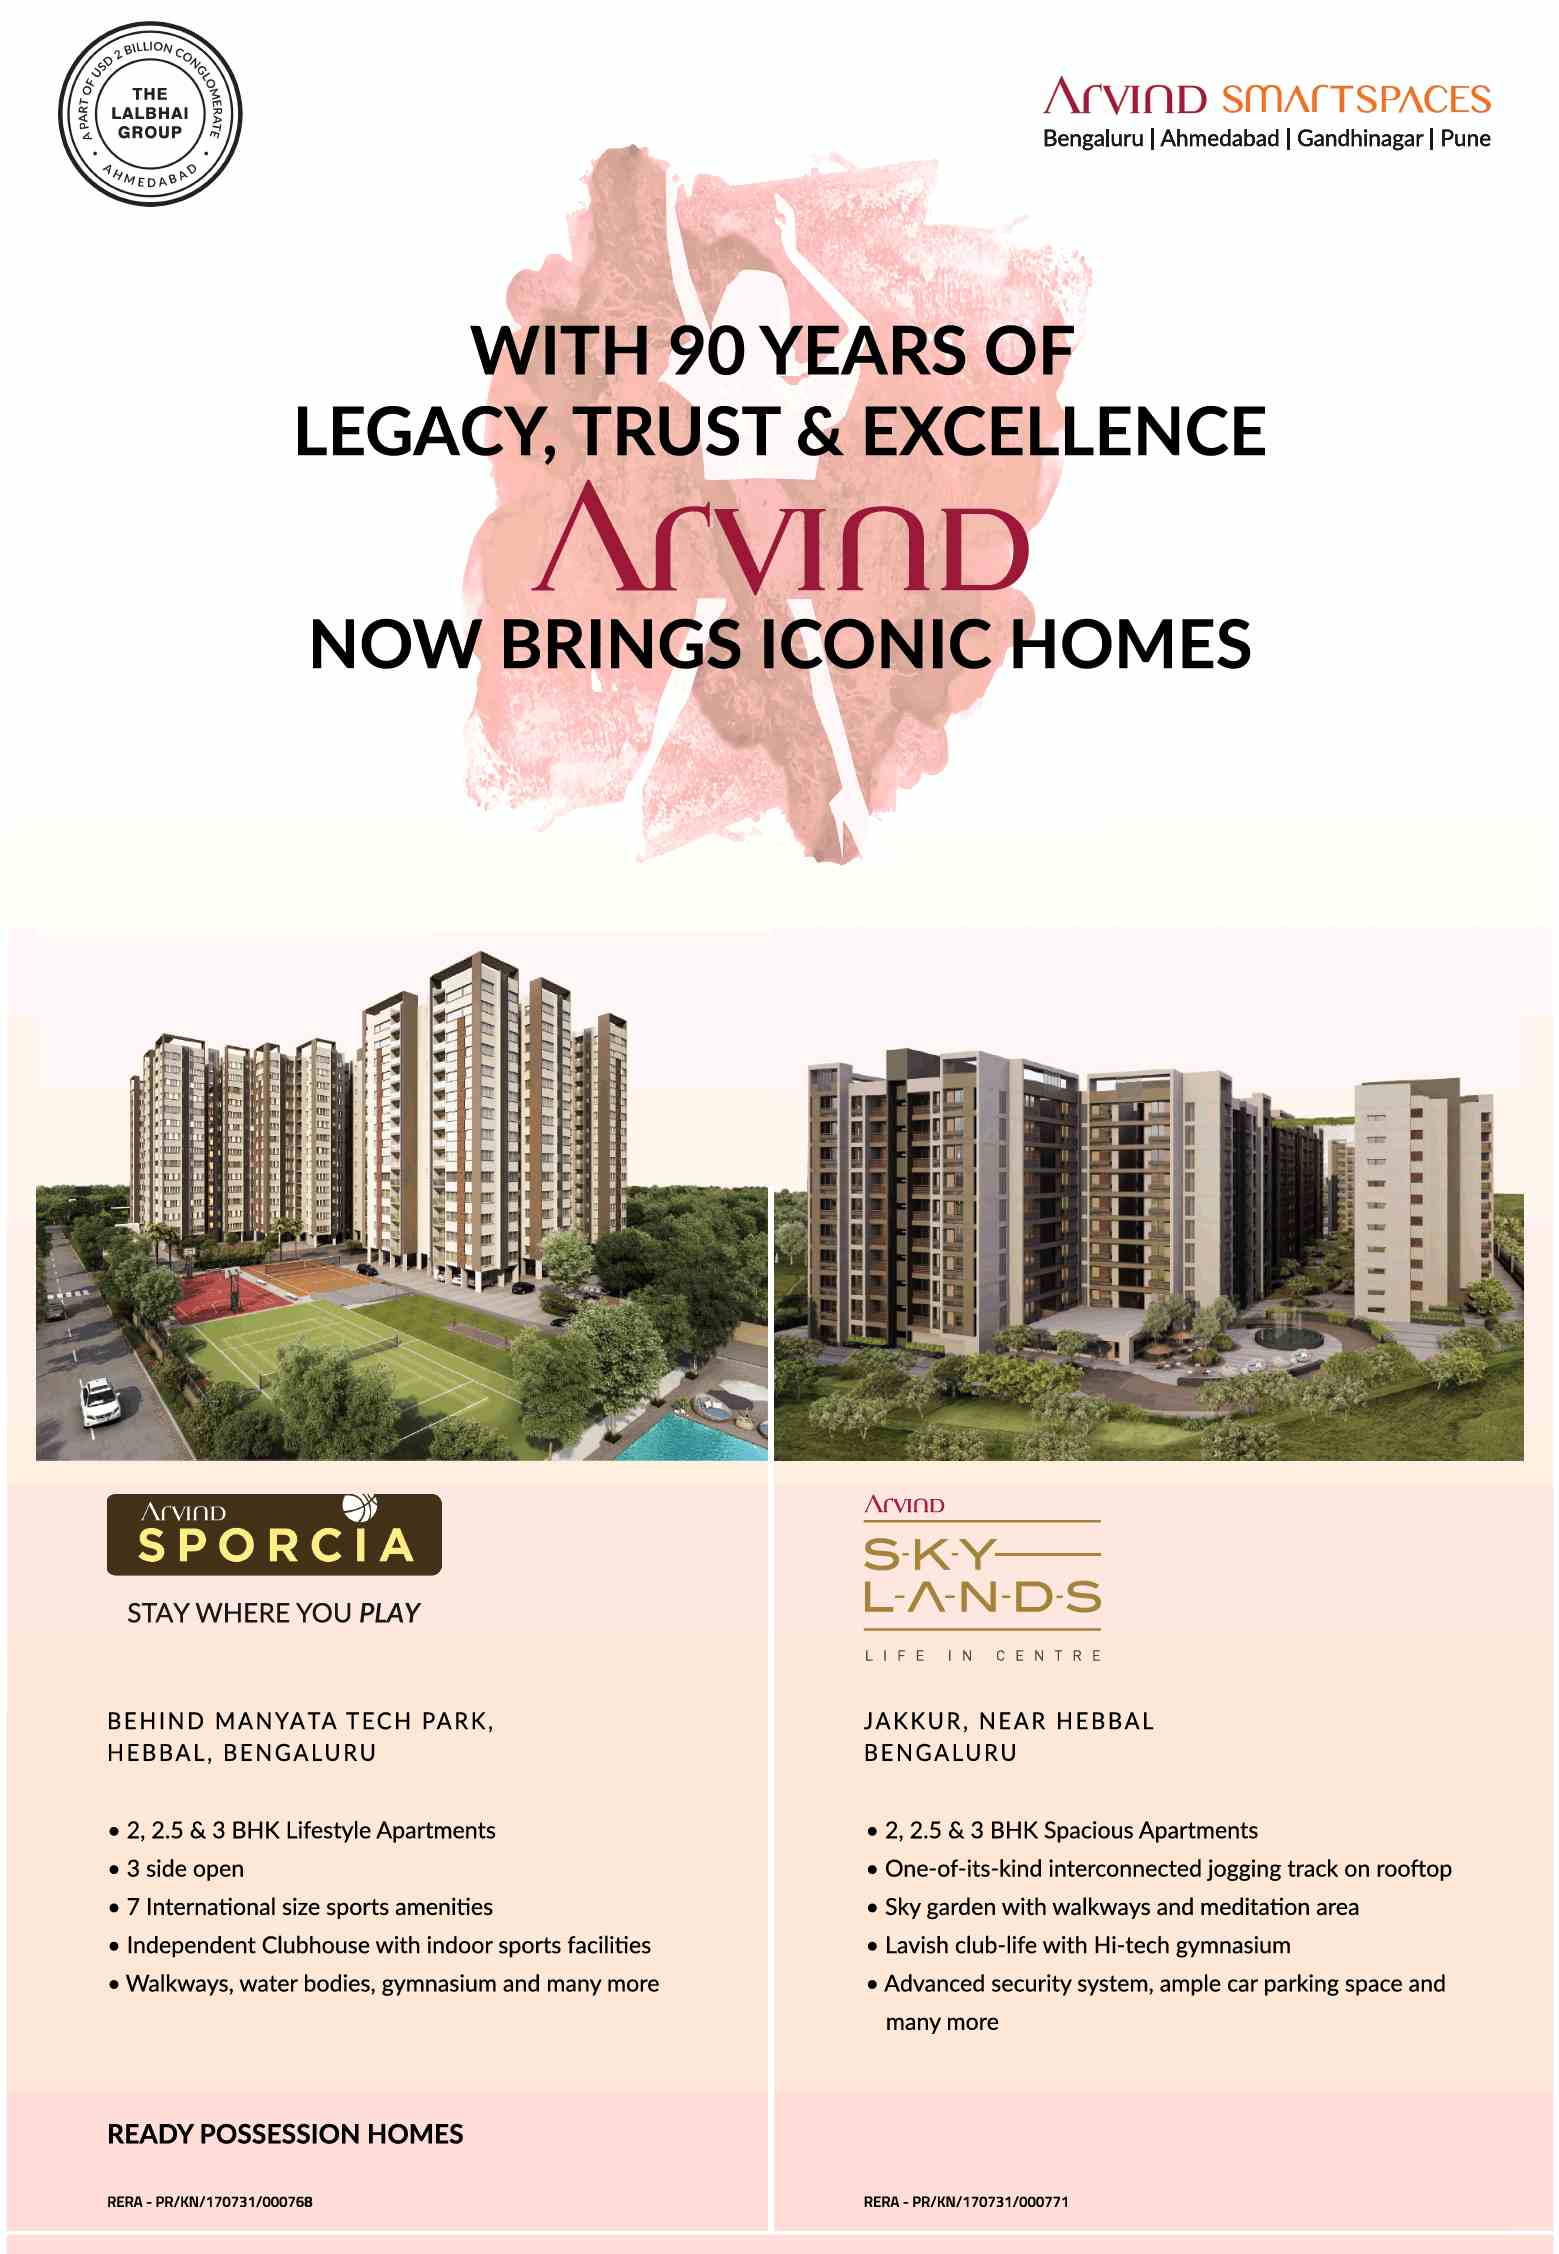 Book ready possession homes at Arvind Projects in Bengaluru